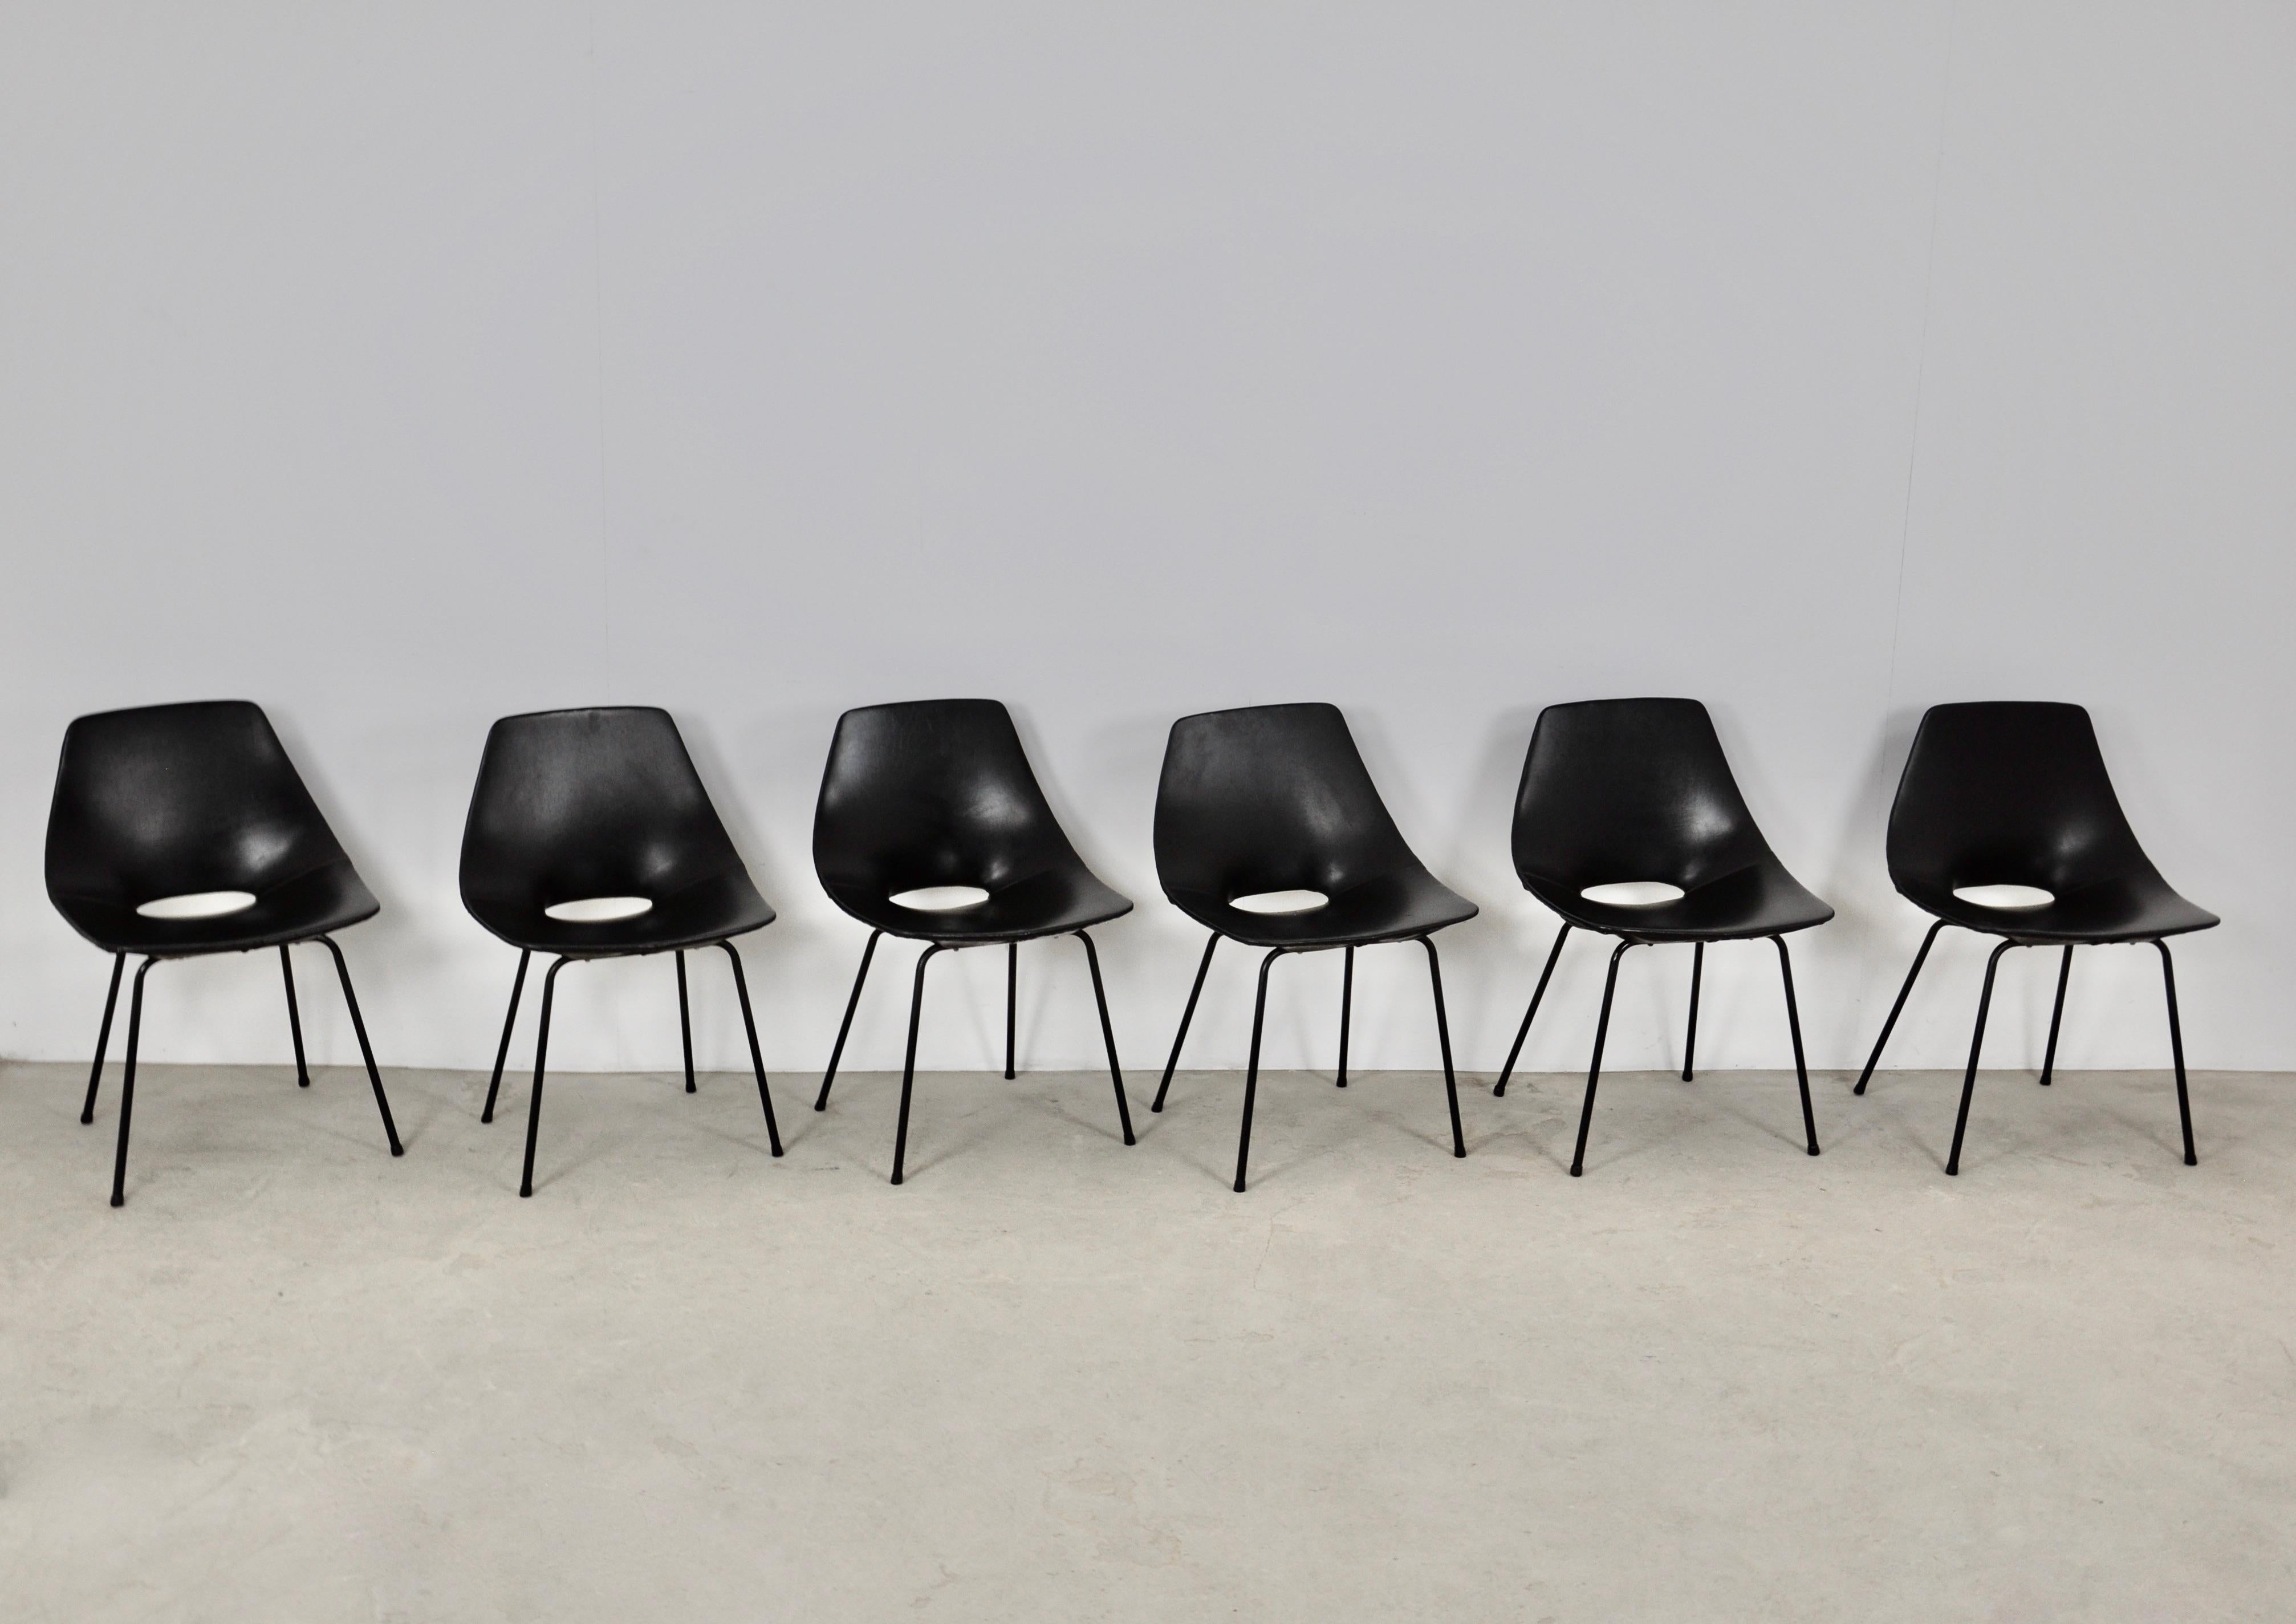 Series of 6 chairs in black skai stamped Steiner. Seat height: 44cm Wear due to time and age of chairs (see photo).
  